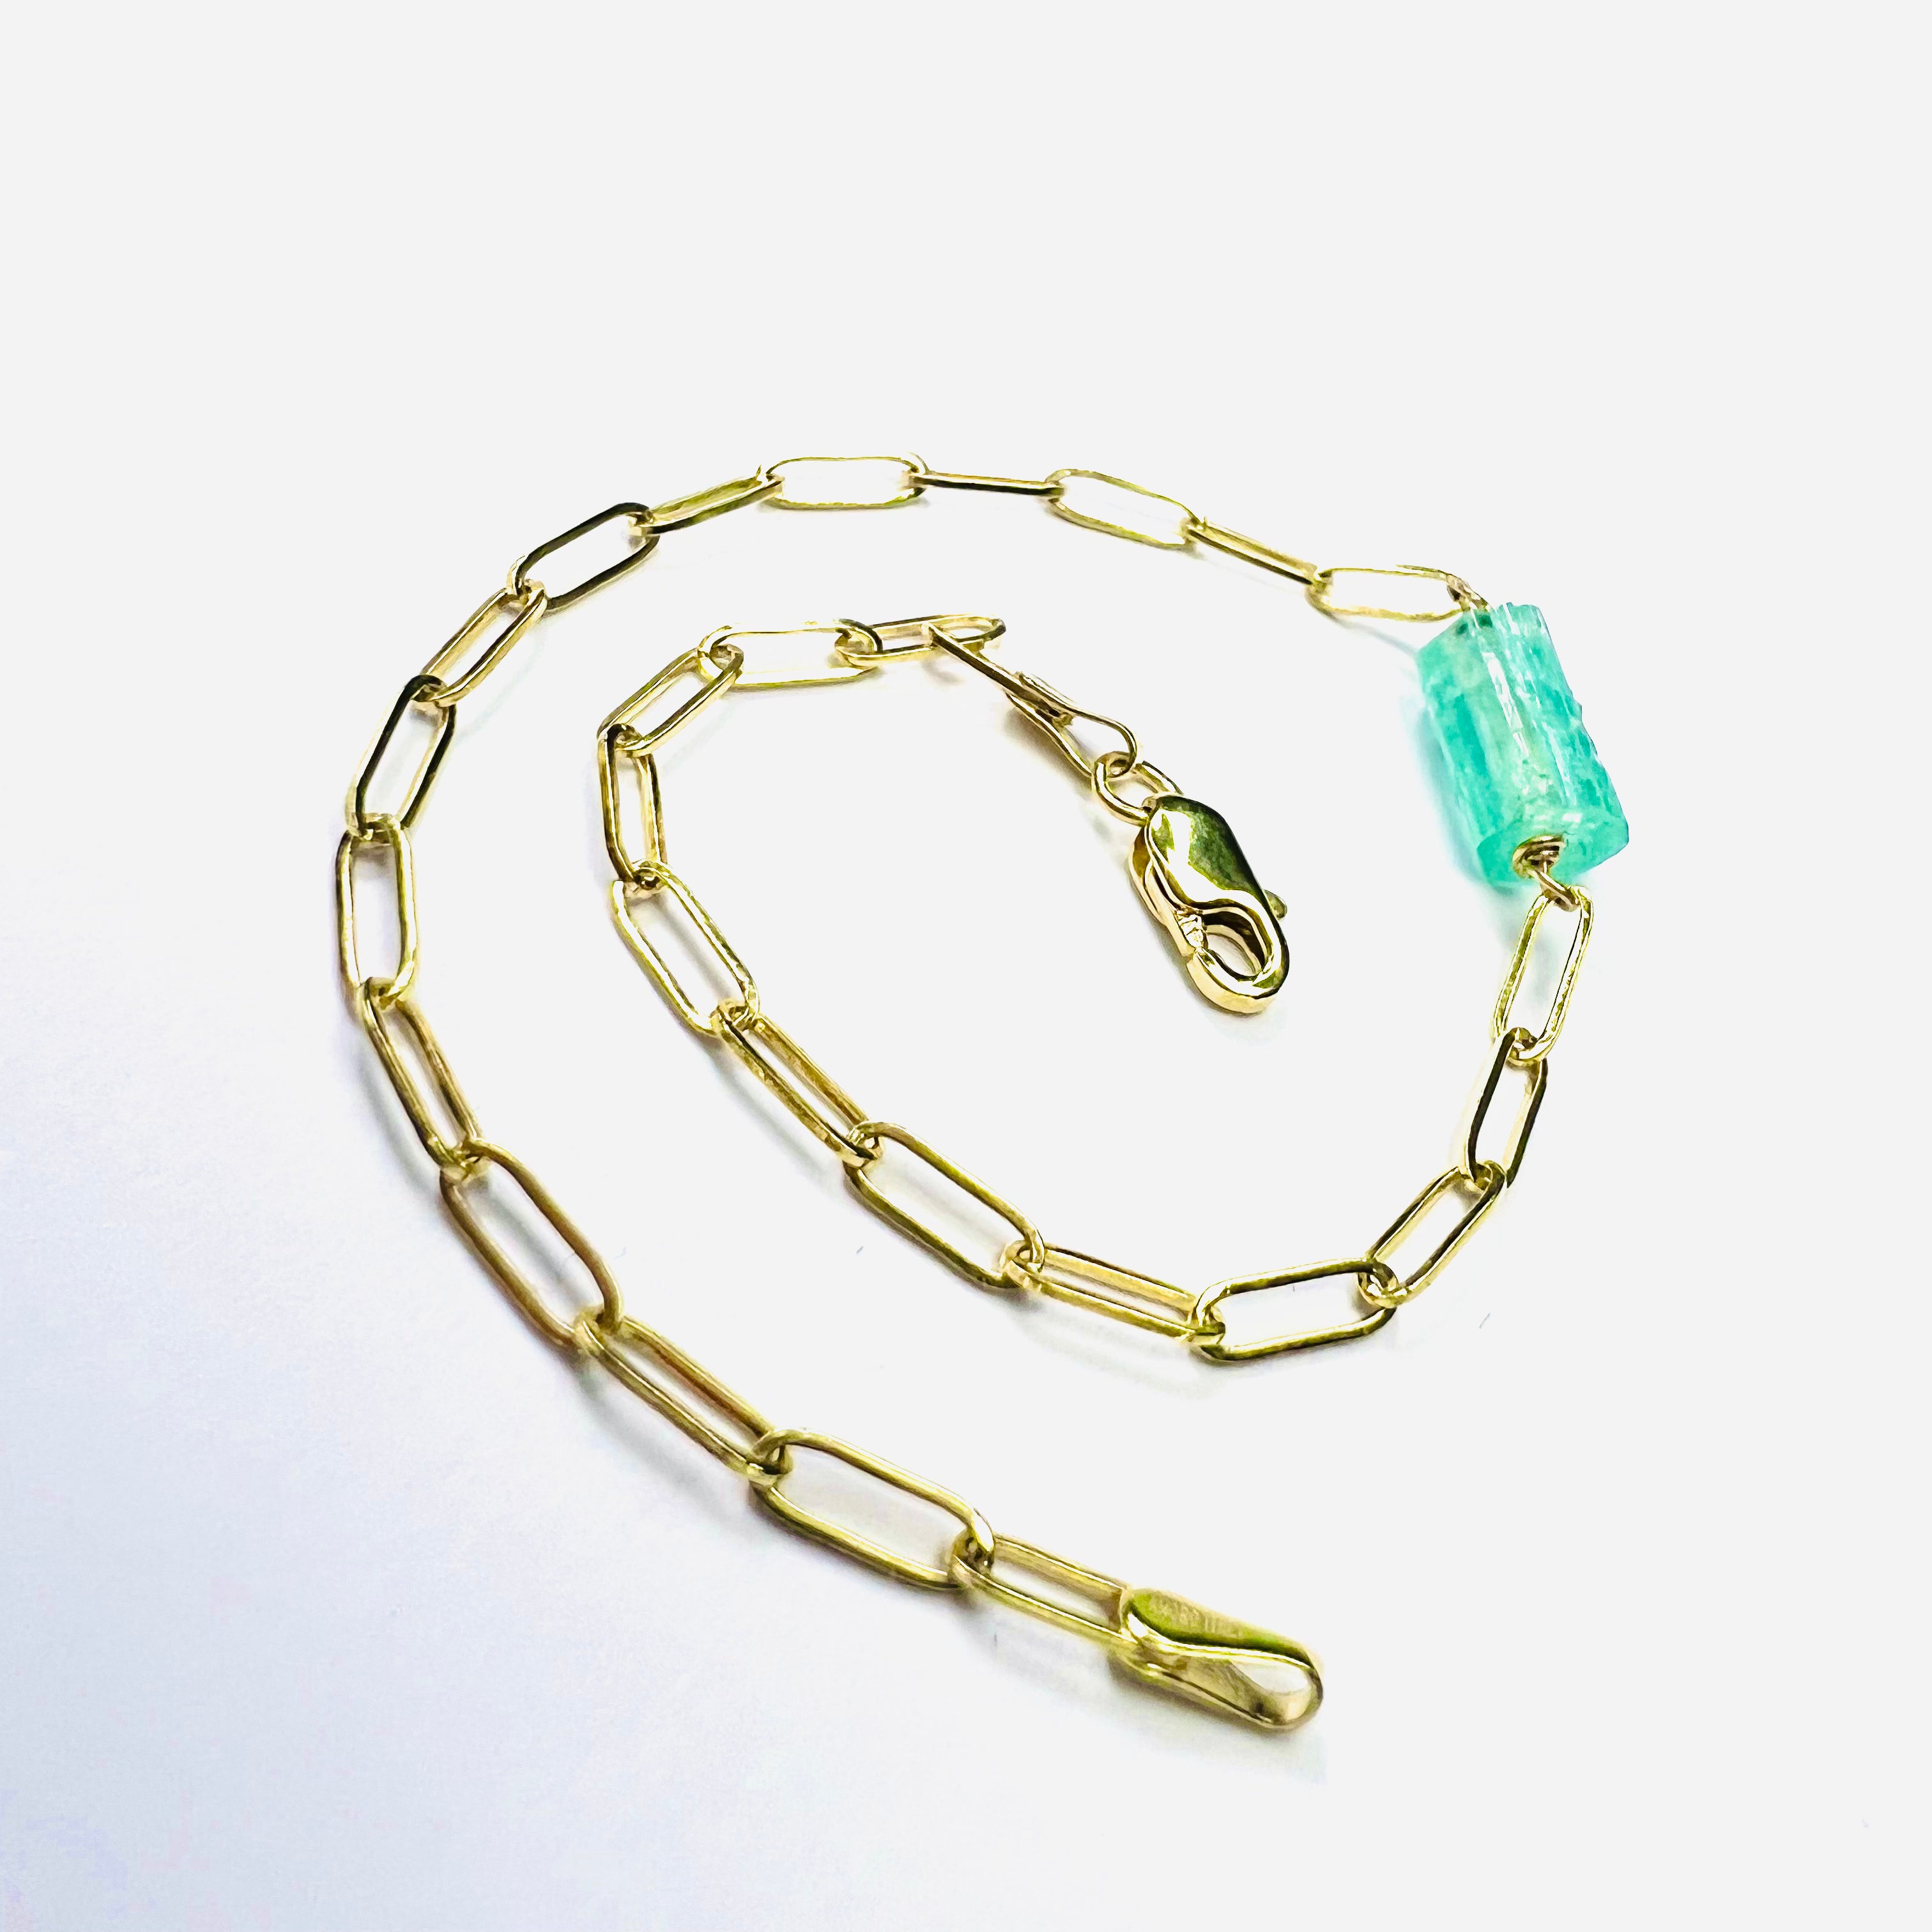 Rough Emerald Bracelet in Solid 14k Yellow Gold 7"